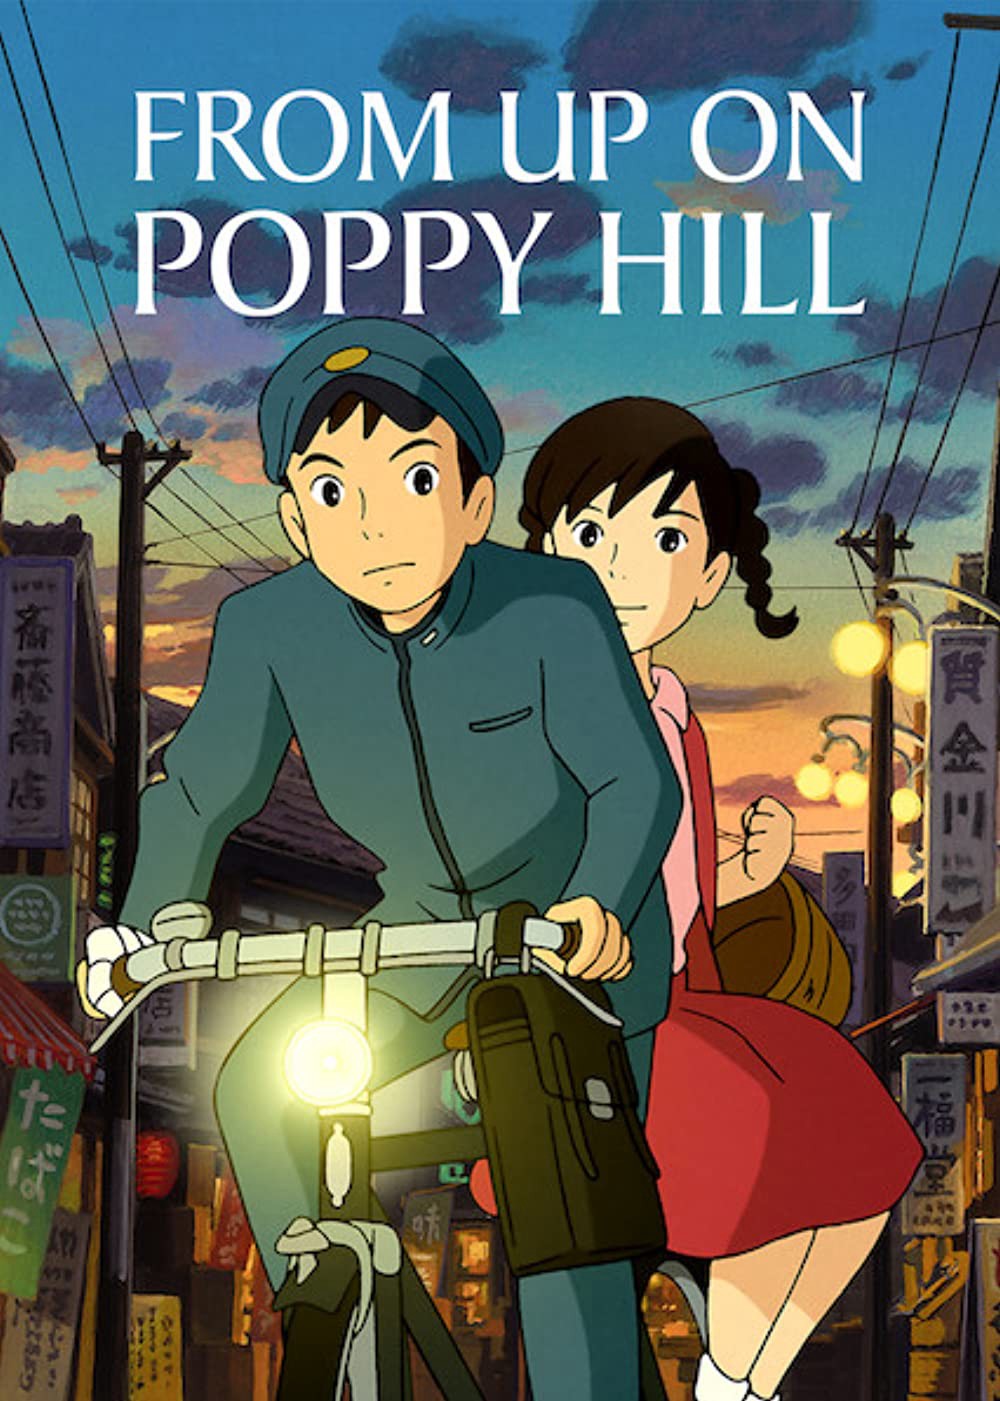 Ngọn đồi hoa hồng anh (From Up on Poppy Hill) [2011]